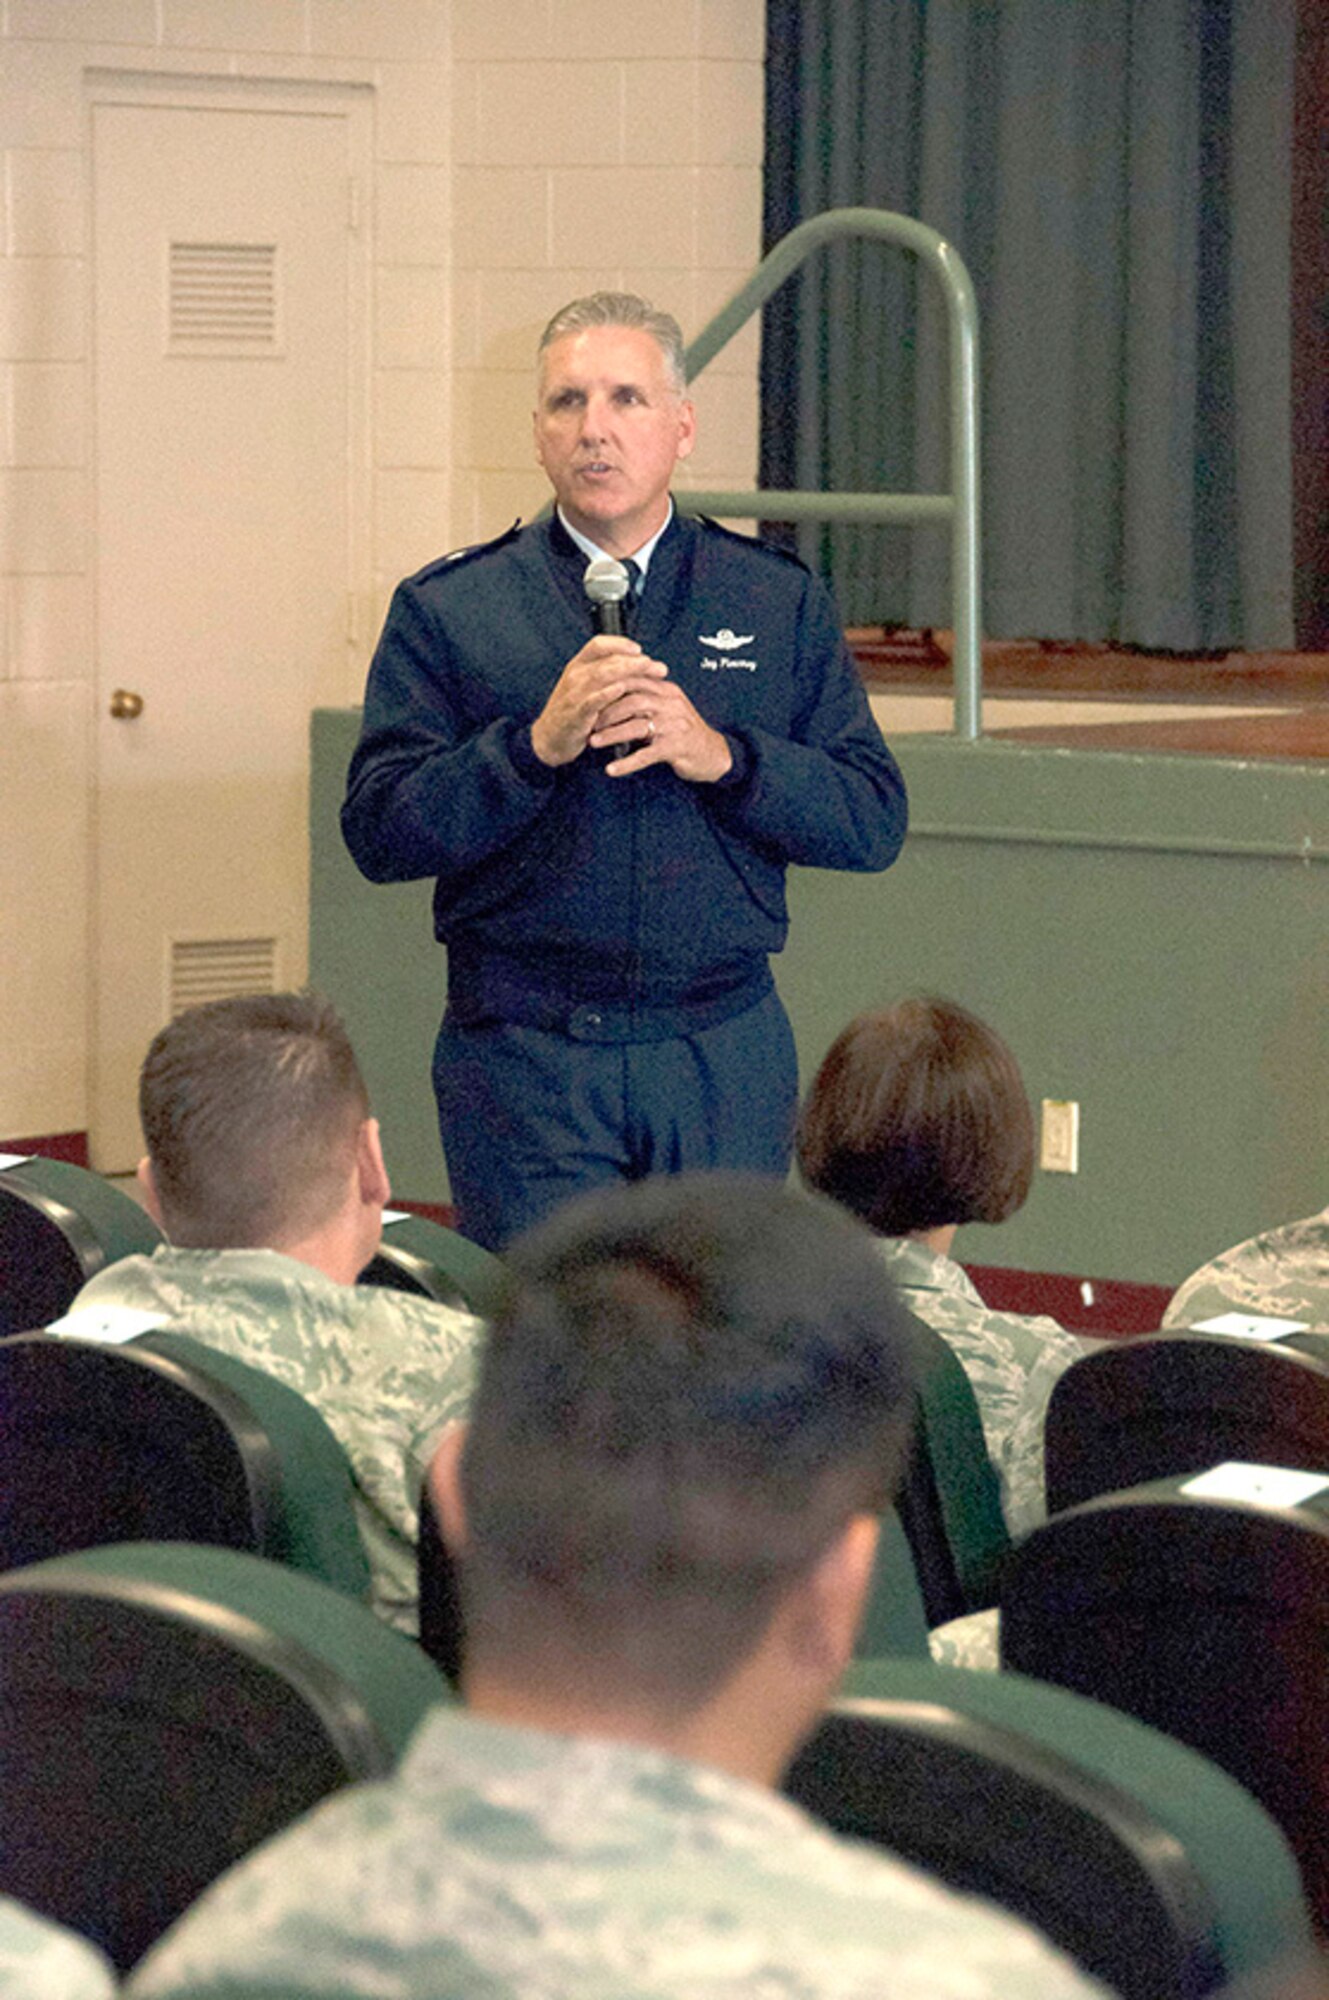 TRAVIS AIR FORCE BASE, Calif. -- Brig. Gen. John C. Flournoy Jr., 4th Air Force commander visited the members of the 349th Air Mobility Wing, during the March A-Flight drill weekend. (U.S. Air Force photo / Master Sgt. Rachel Martinez)